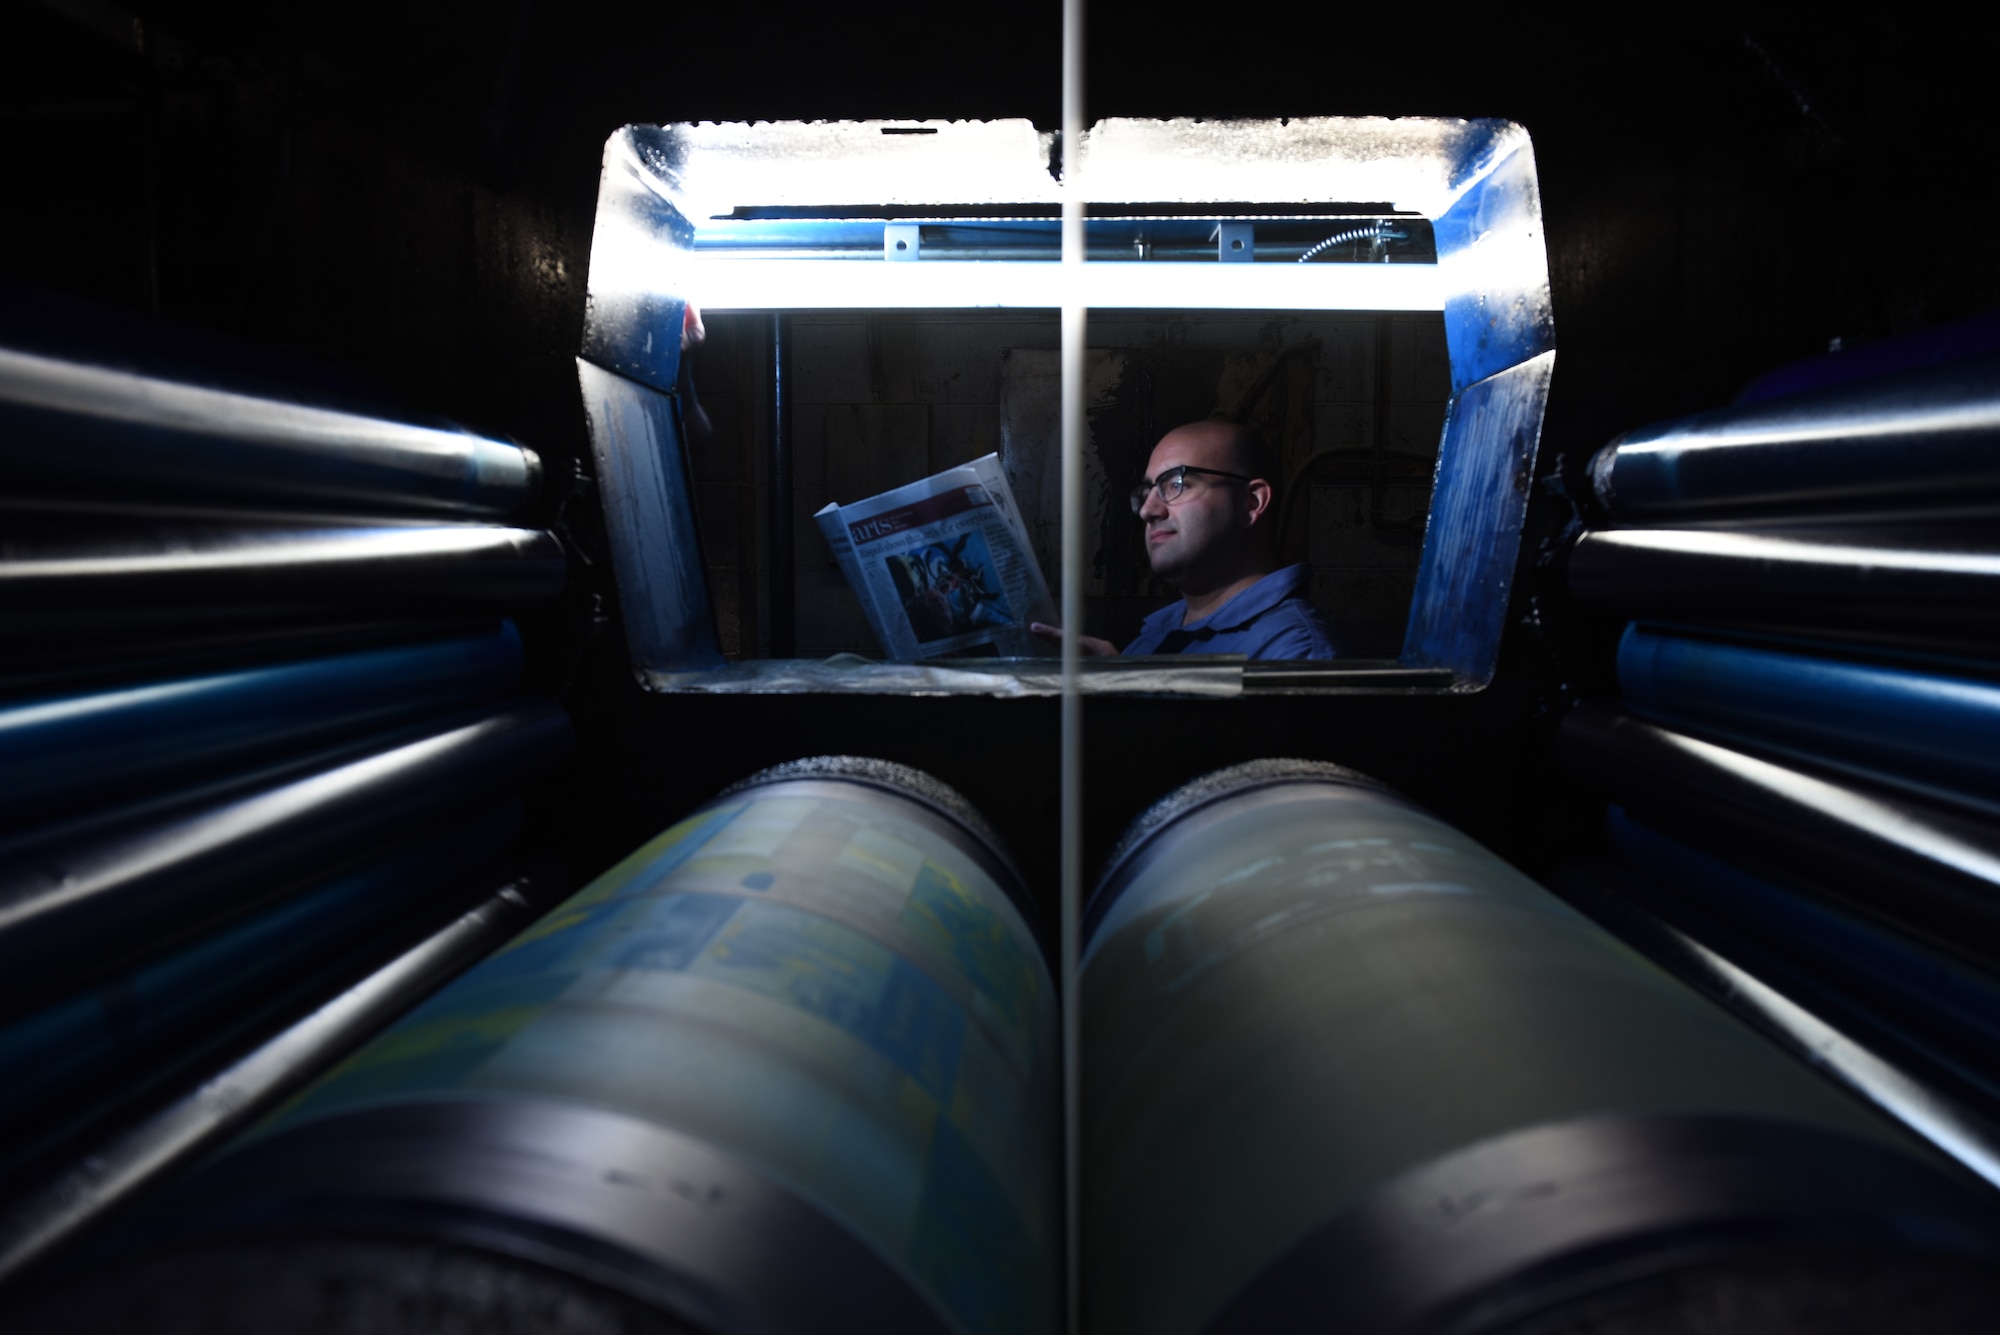 Nick DeCicco, Tailwind editor, poses for a photo May 4, 2018, at the Daily Republic Newspaper Office in Fairfield, Calif. DeCicco works at the Daily Republic, which houses the printing press where the Tailwind is printed. (U.S. Air Force photo by Staff Sgt. Amber Carter/Airman 1st Class Amy Younger)